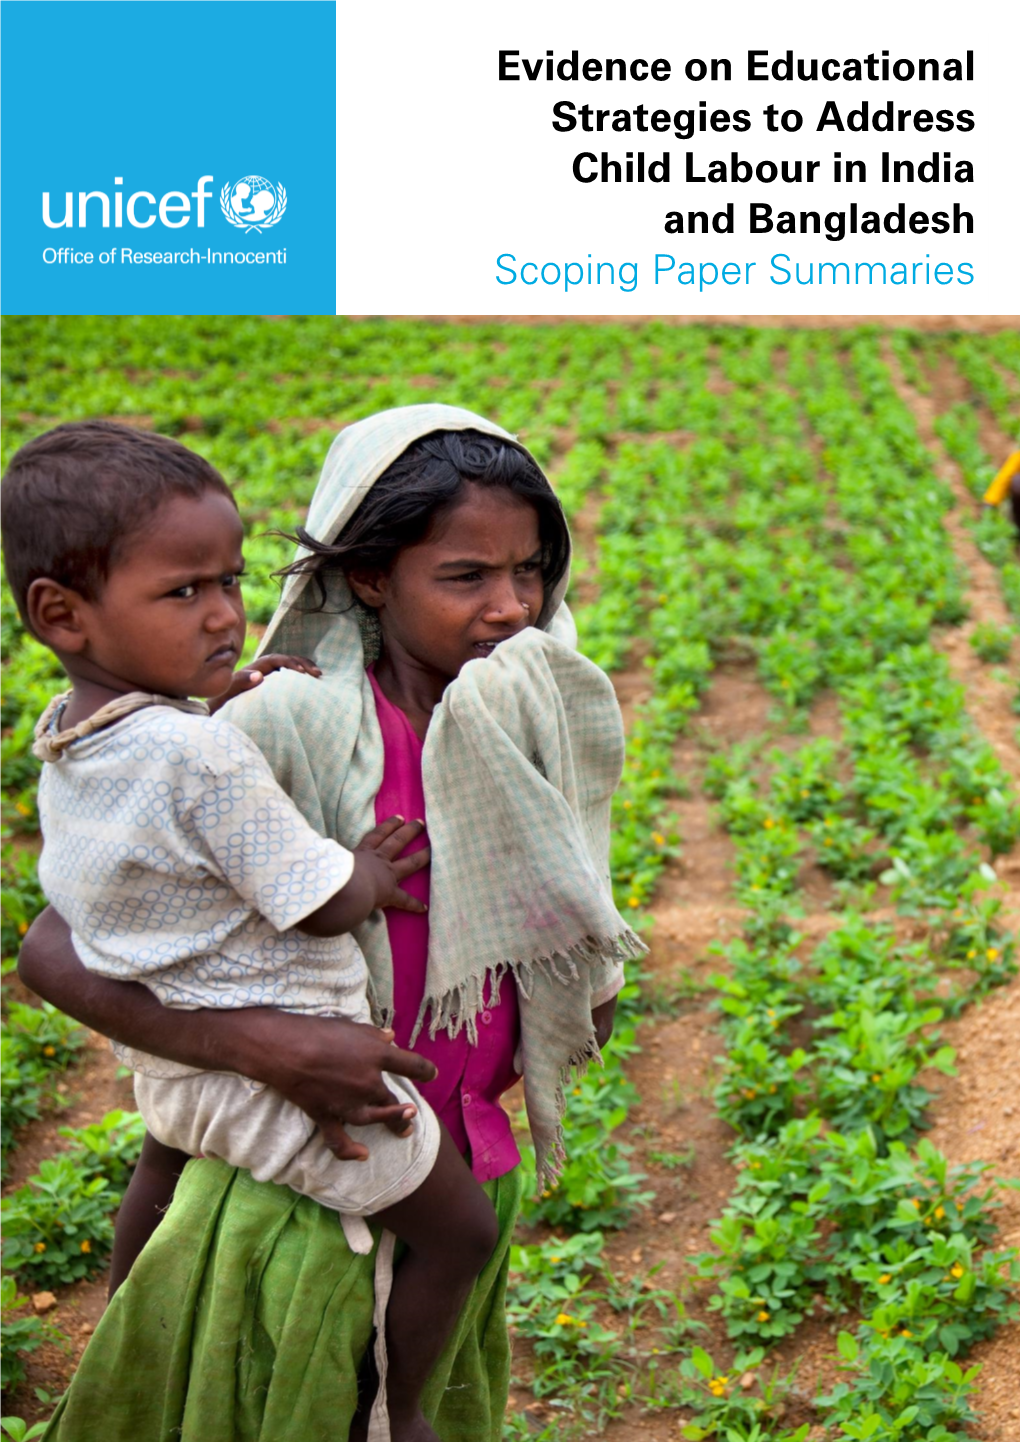 Educational Strategies to Address Child Labour in India and Bangladesh